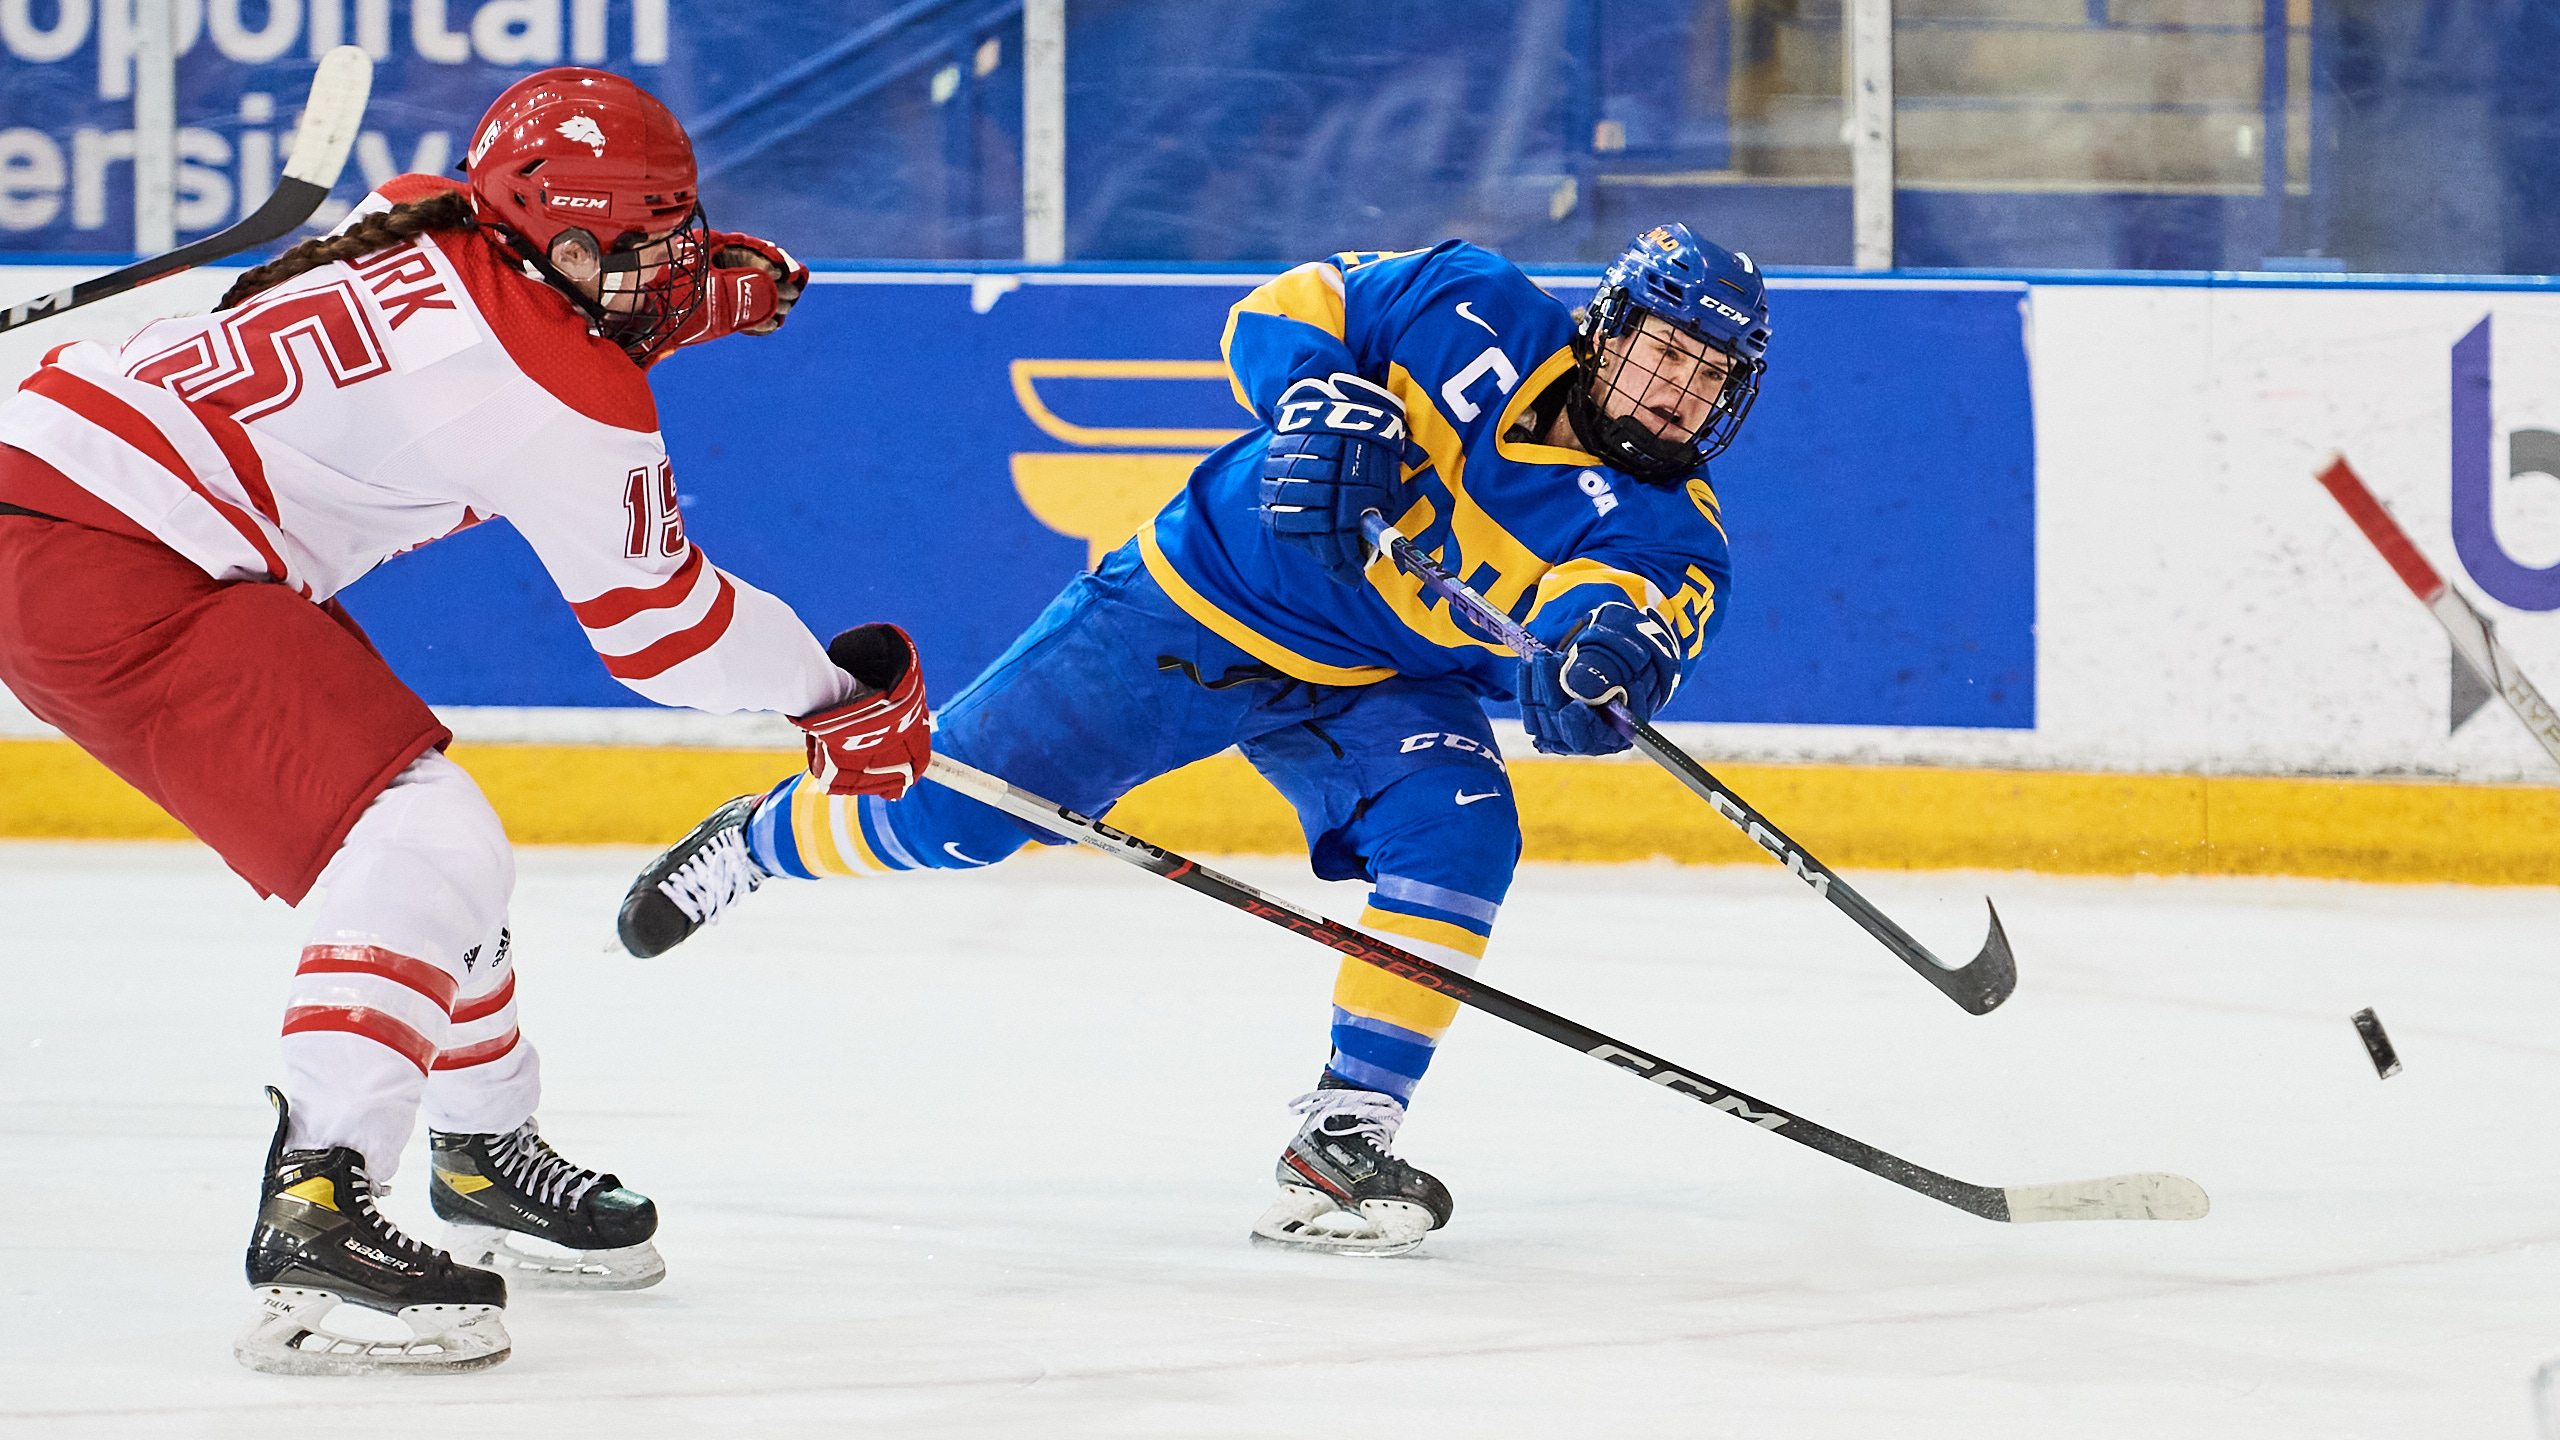 TMU women's hockey player Emily Baxter shoots a puck while being defended by a York defender